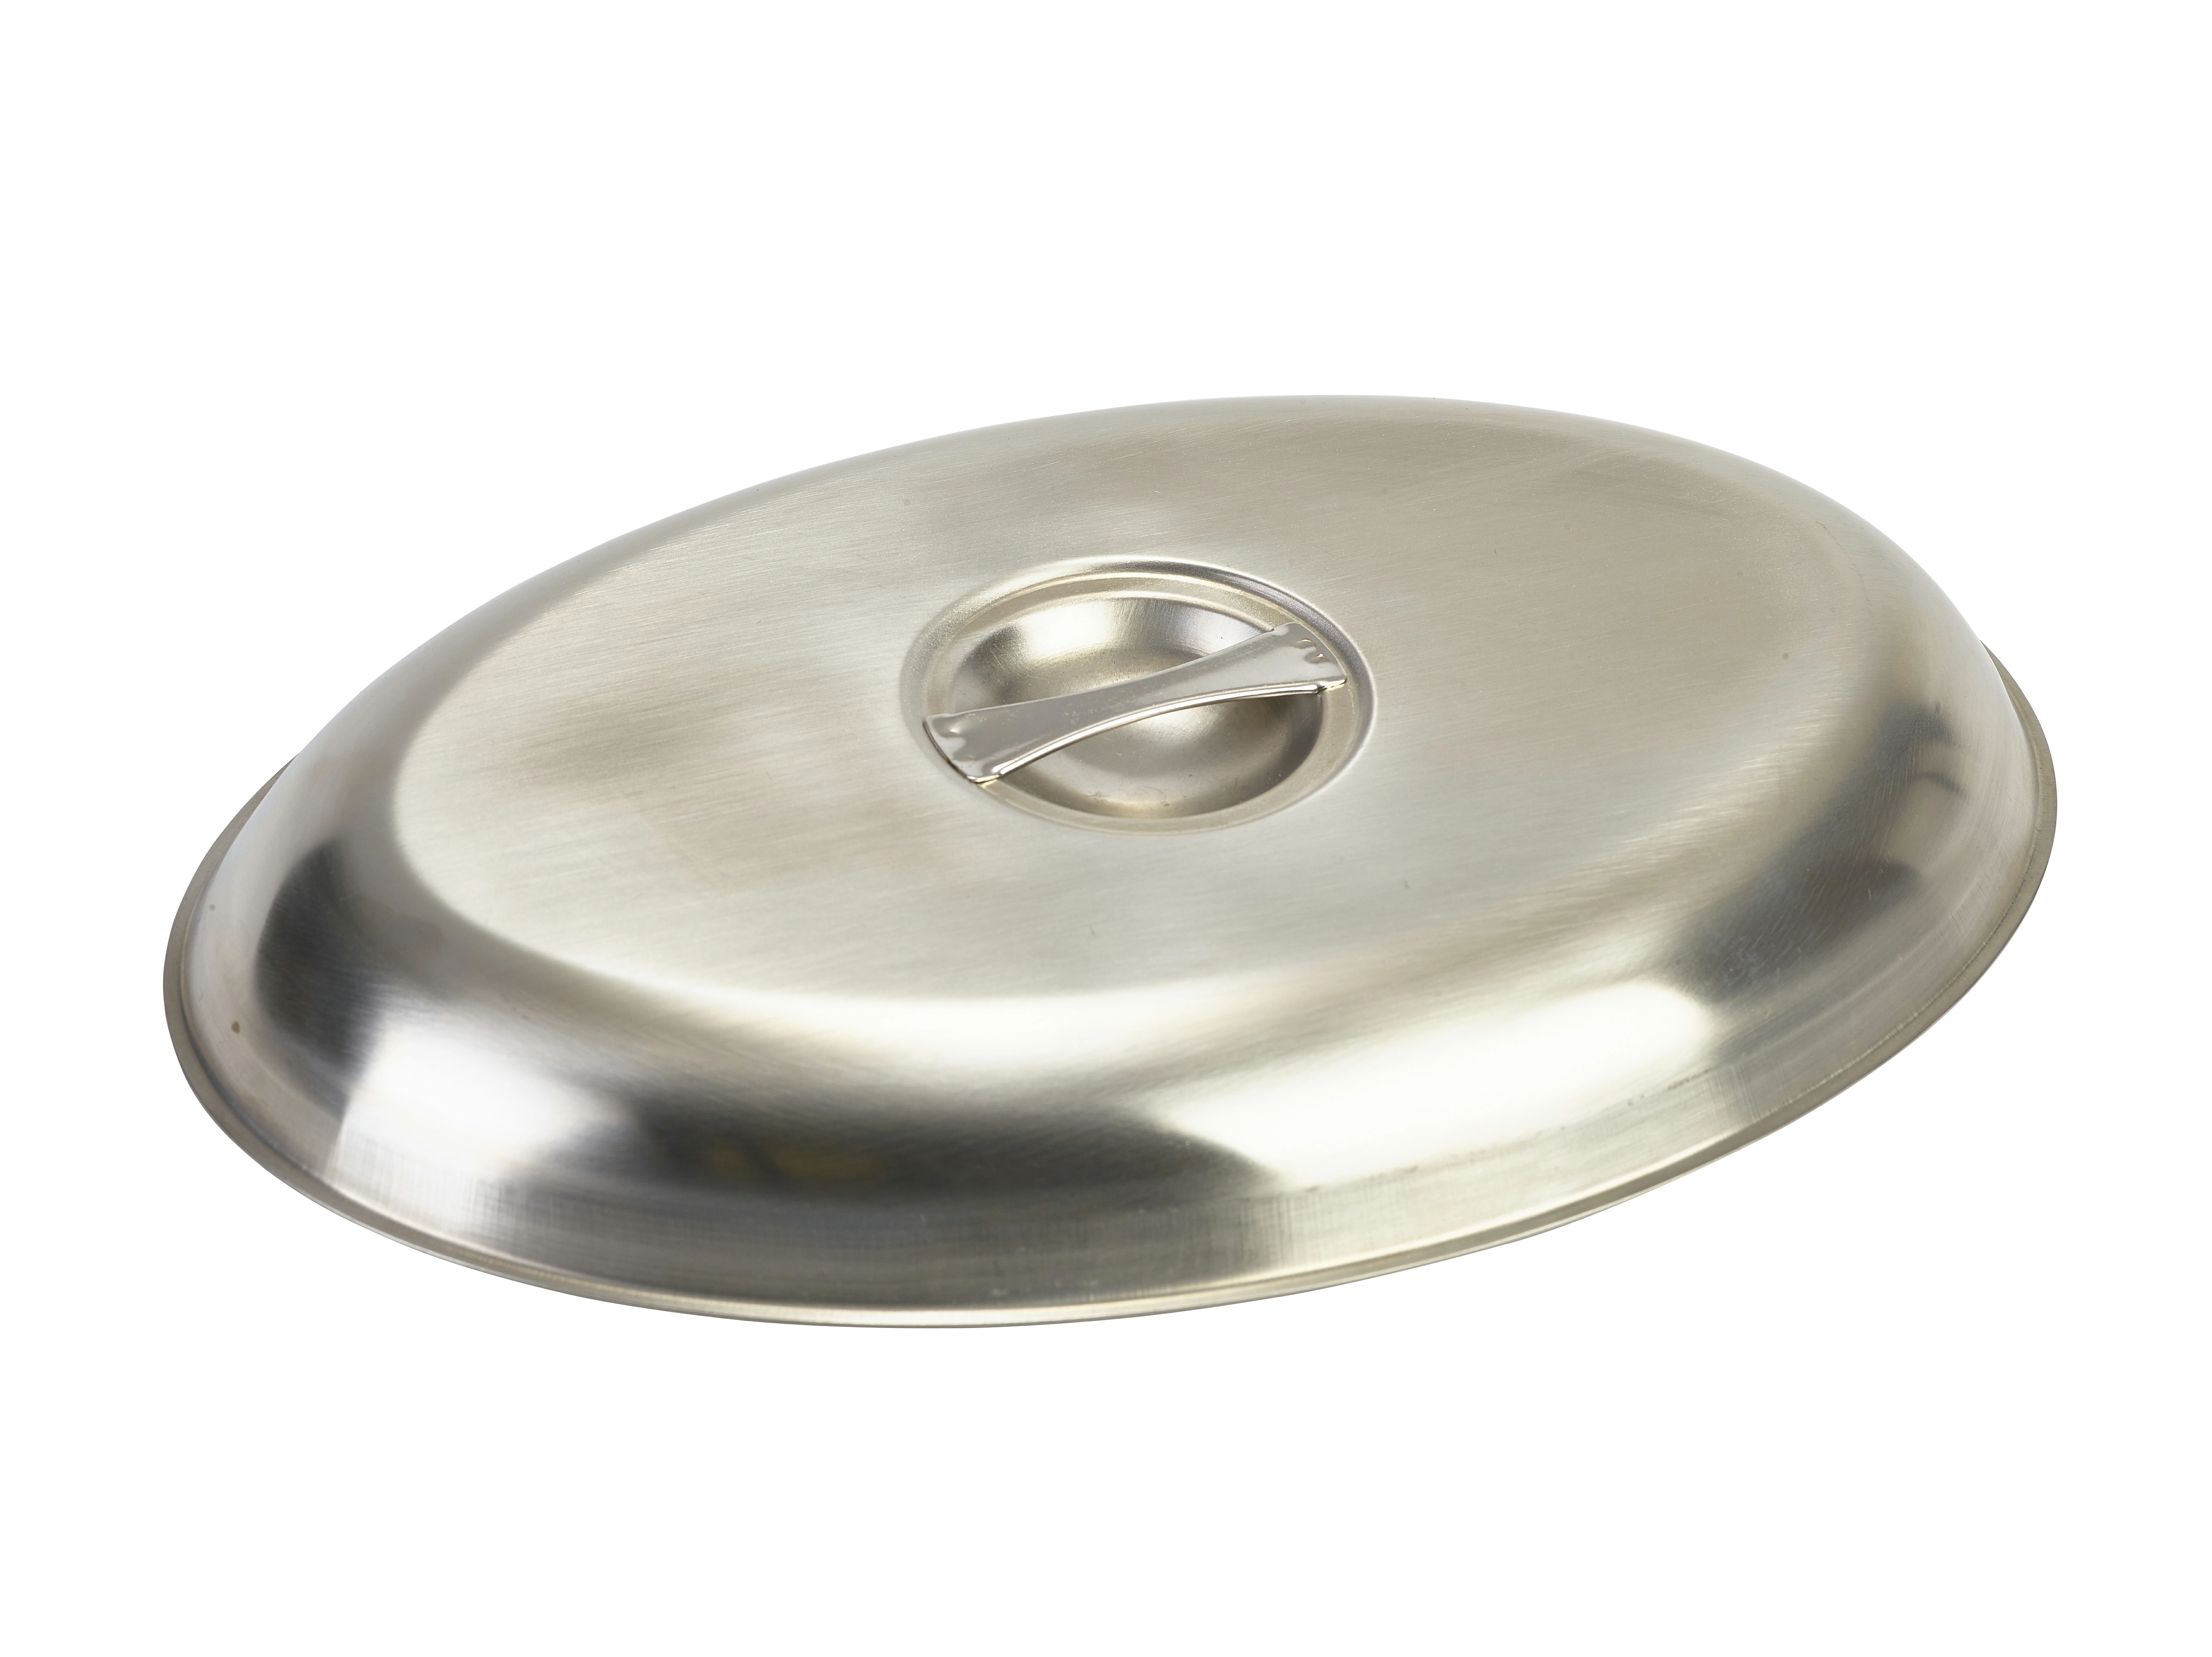 GenWare Stainless Steel Cover For Oval Vegetable Dish 35cm/14"